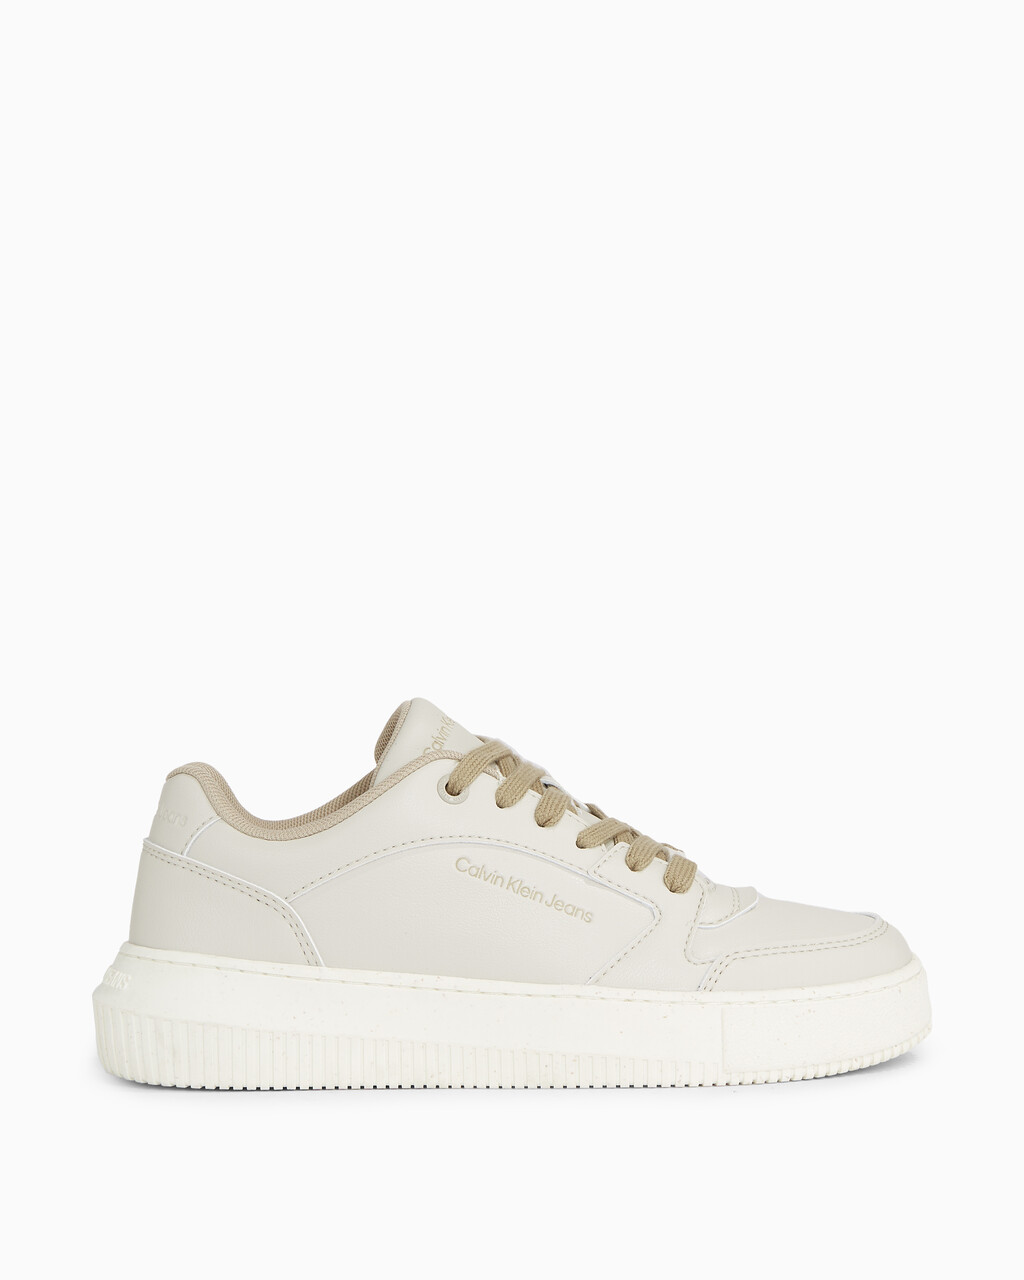 Faux Leather Trainers, Eggshell/Travertine, hi-res